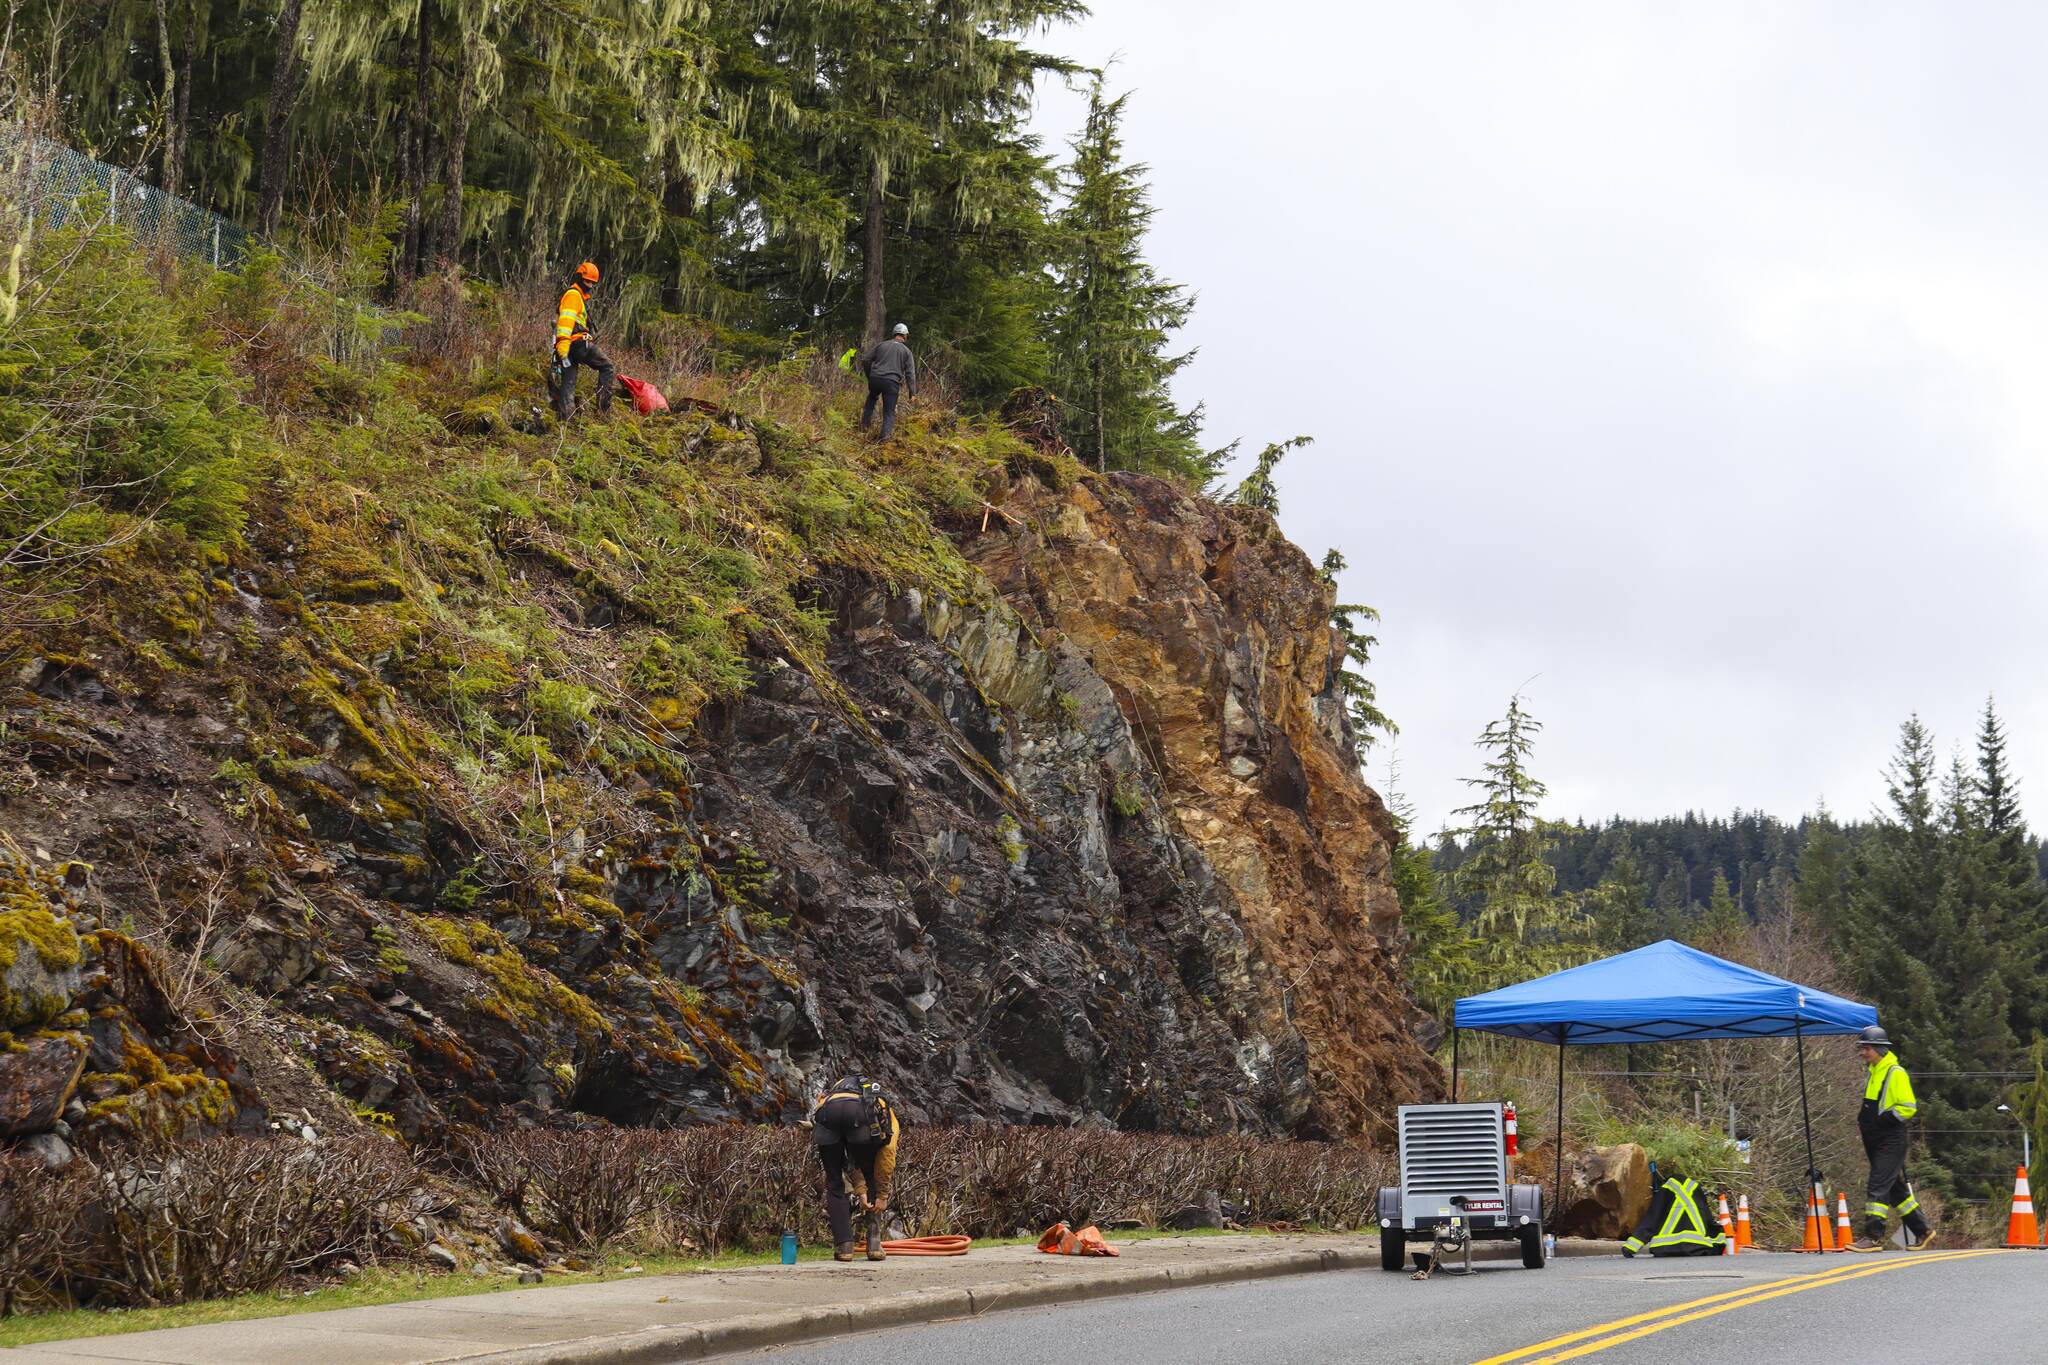 University of Alaska Southeast employed contractors from Advanced Blasting Services to clear remaining material from a cliffside that had a substantial rockslide in February. (Michael S. Lockett / Juneau Empire)